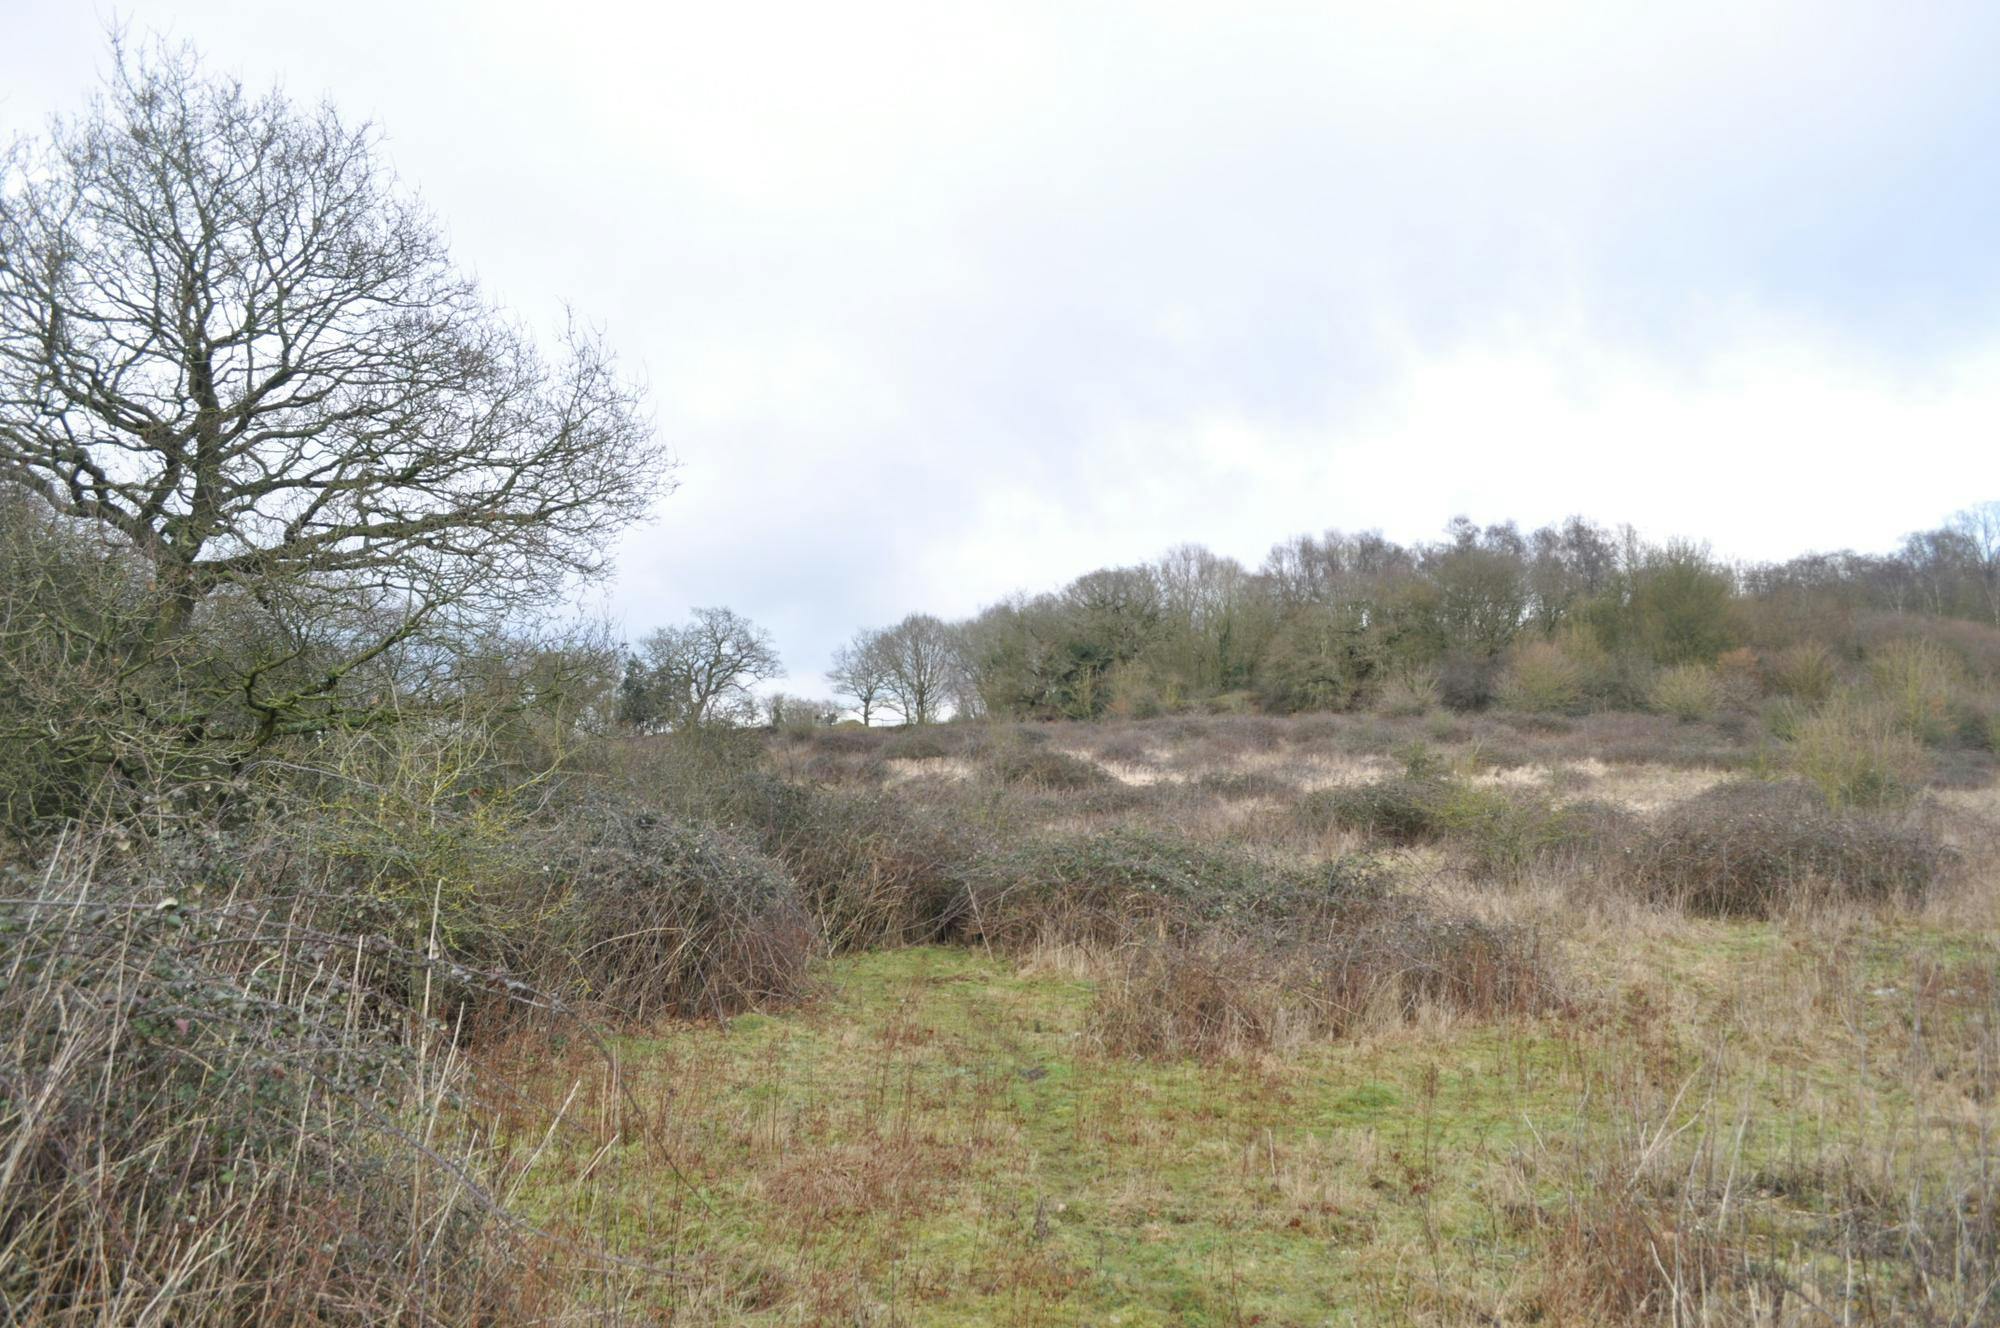 Photo of the site with shrubs and trees